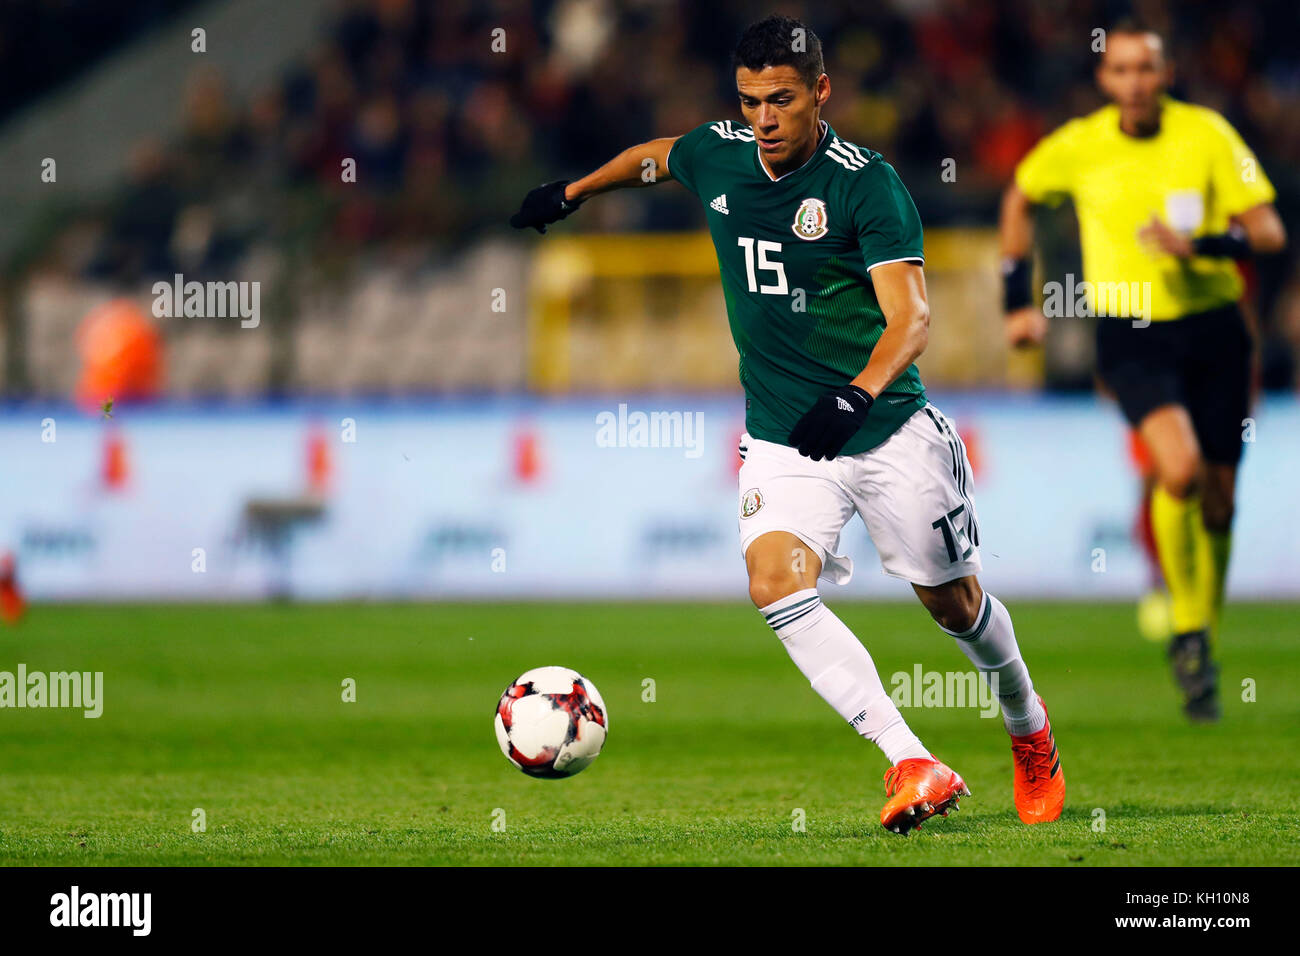 Brussels, Belgium. Credit: D. 10th Nov, 2017. Hector Moreno (MEX) Football/Soccer : International friendly match between Belgium 3-3 Mexico at the KingBaudouin Stadium in Brussels, Belgium. Credit: D .Nakashima/AFLO/Alamy Live News Stock Photo